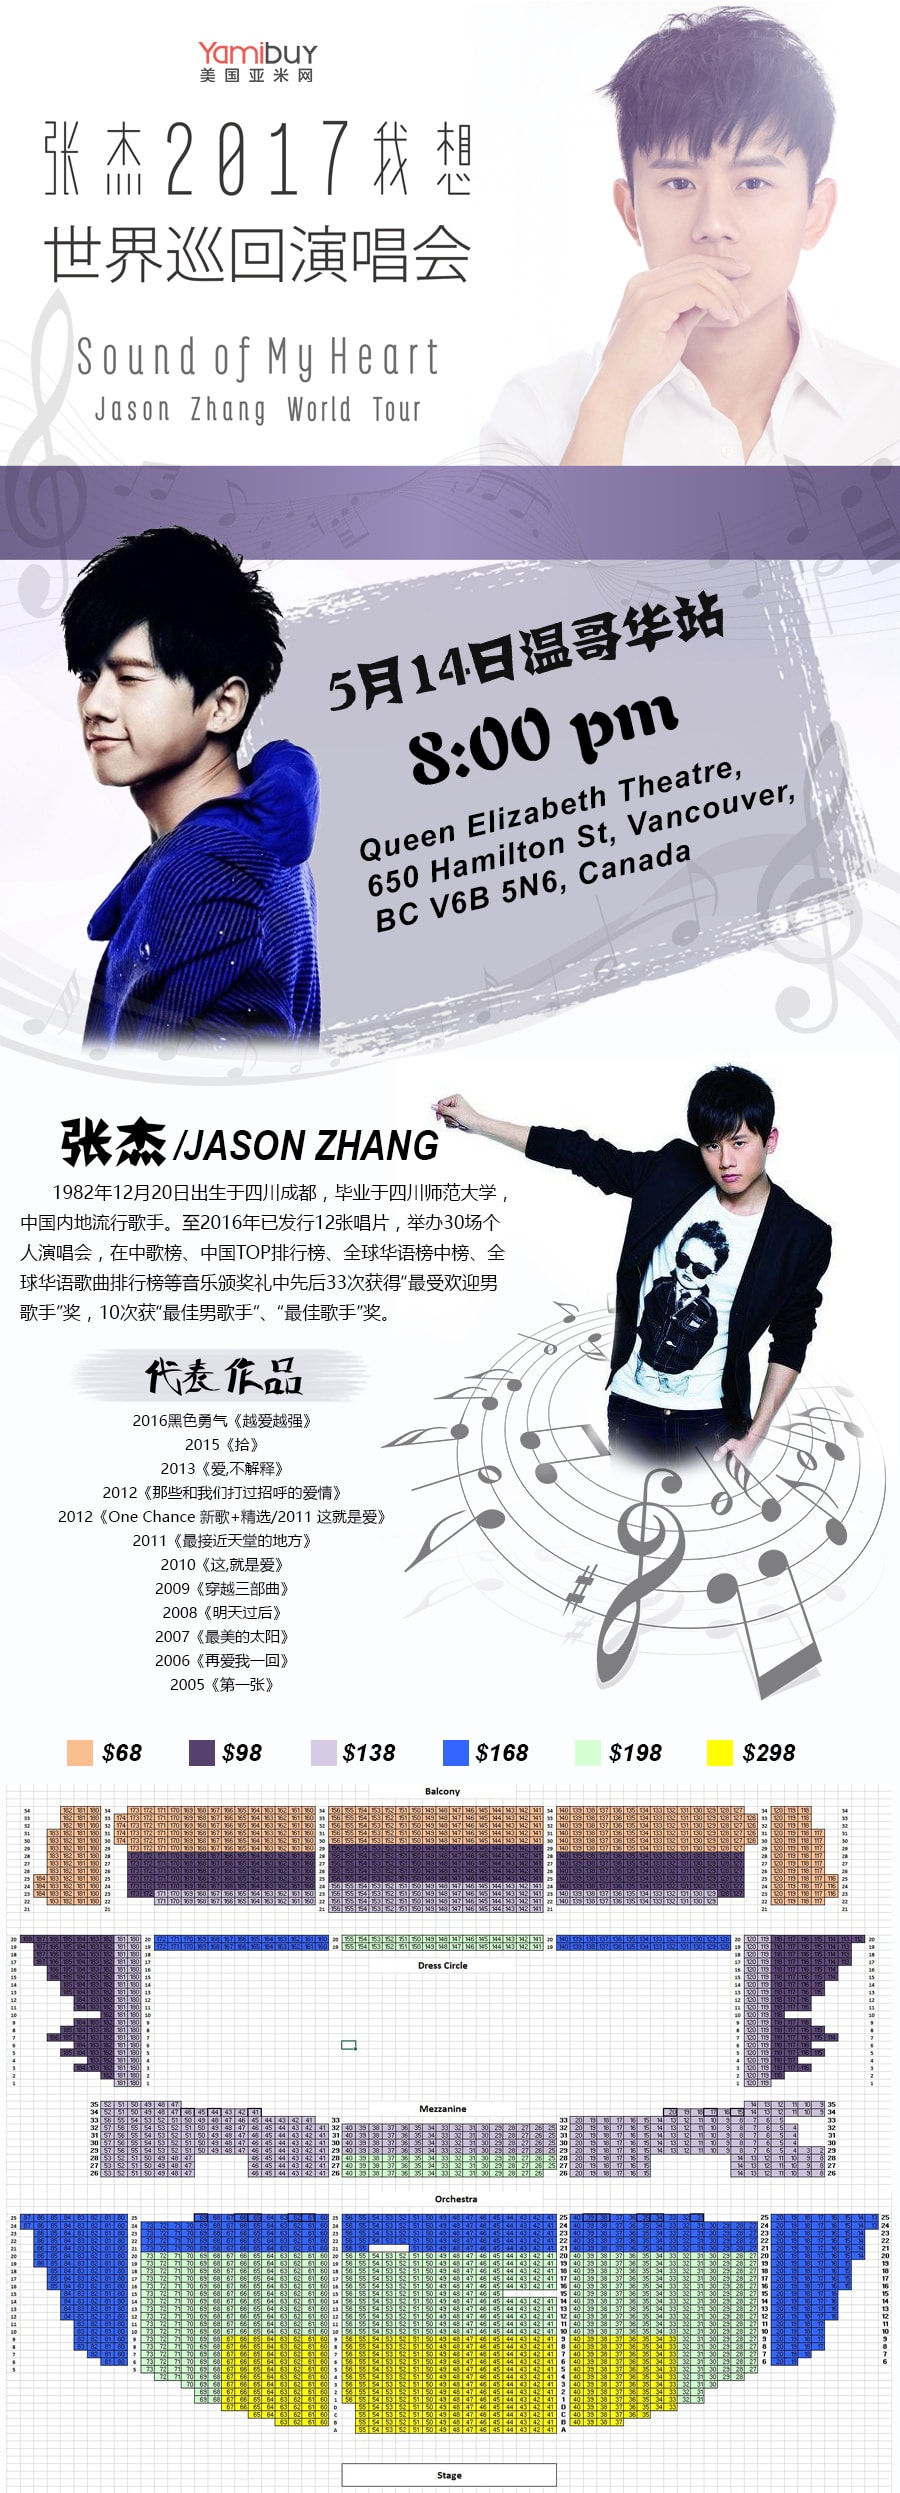 Jason Zhang 2017 SOUND OF MY HEART World Tour May.14th  Vancouver  $138